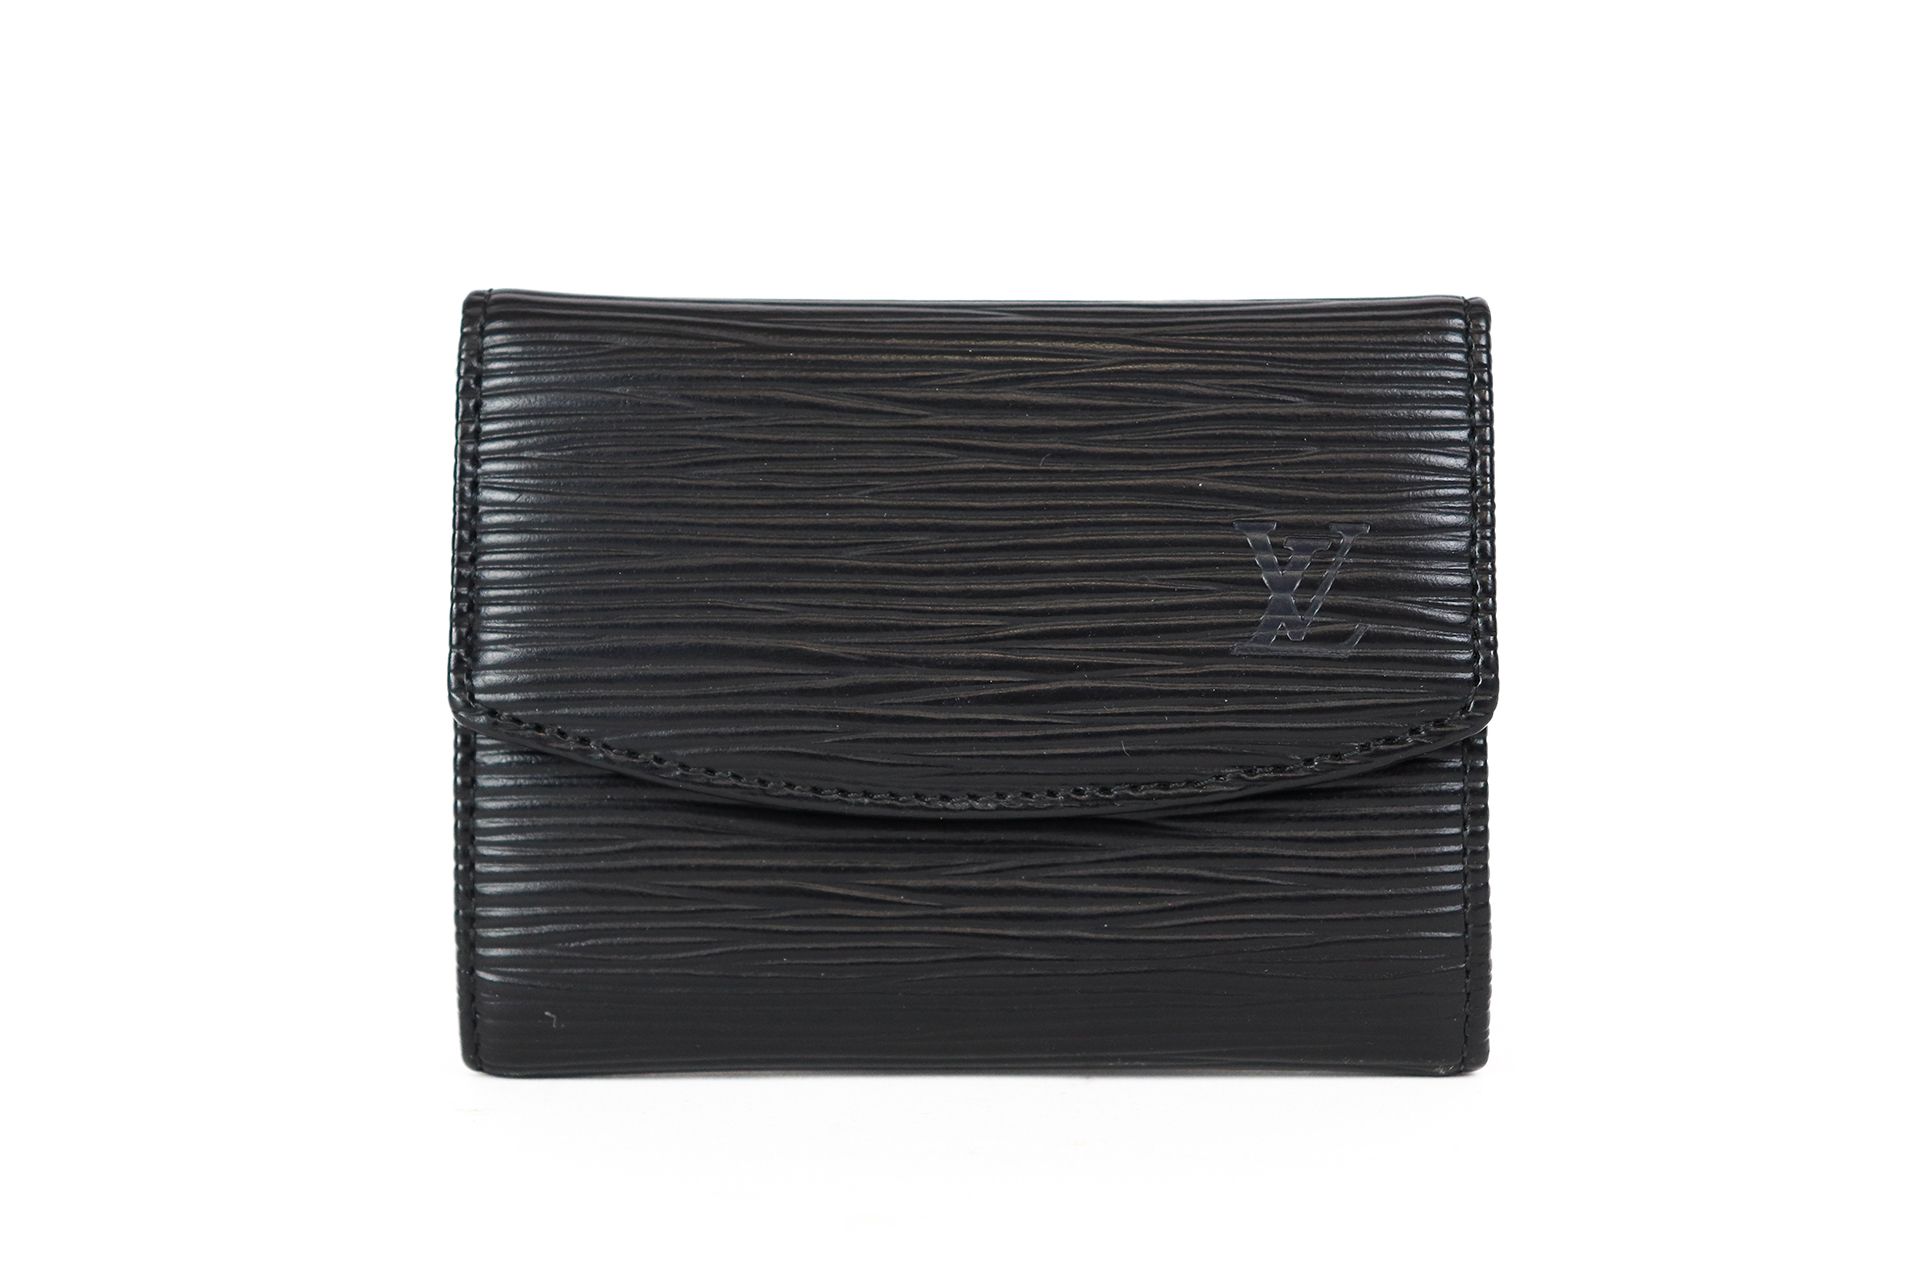 Louis VUITTON Purse in black epi leather. In its box. …